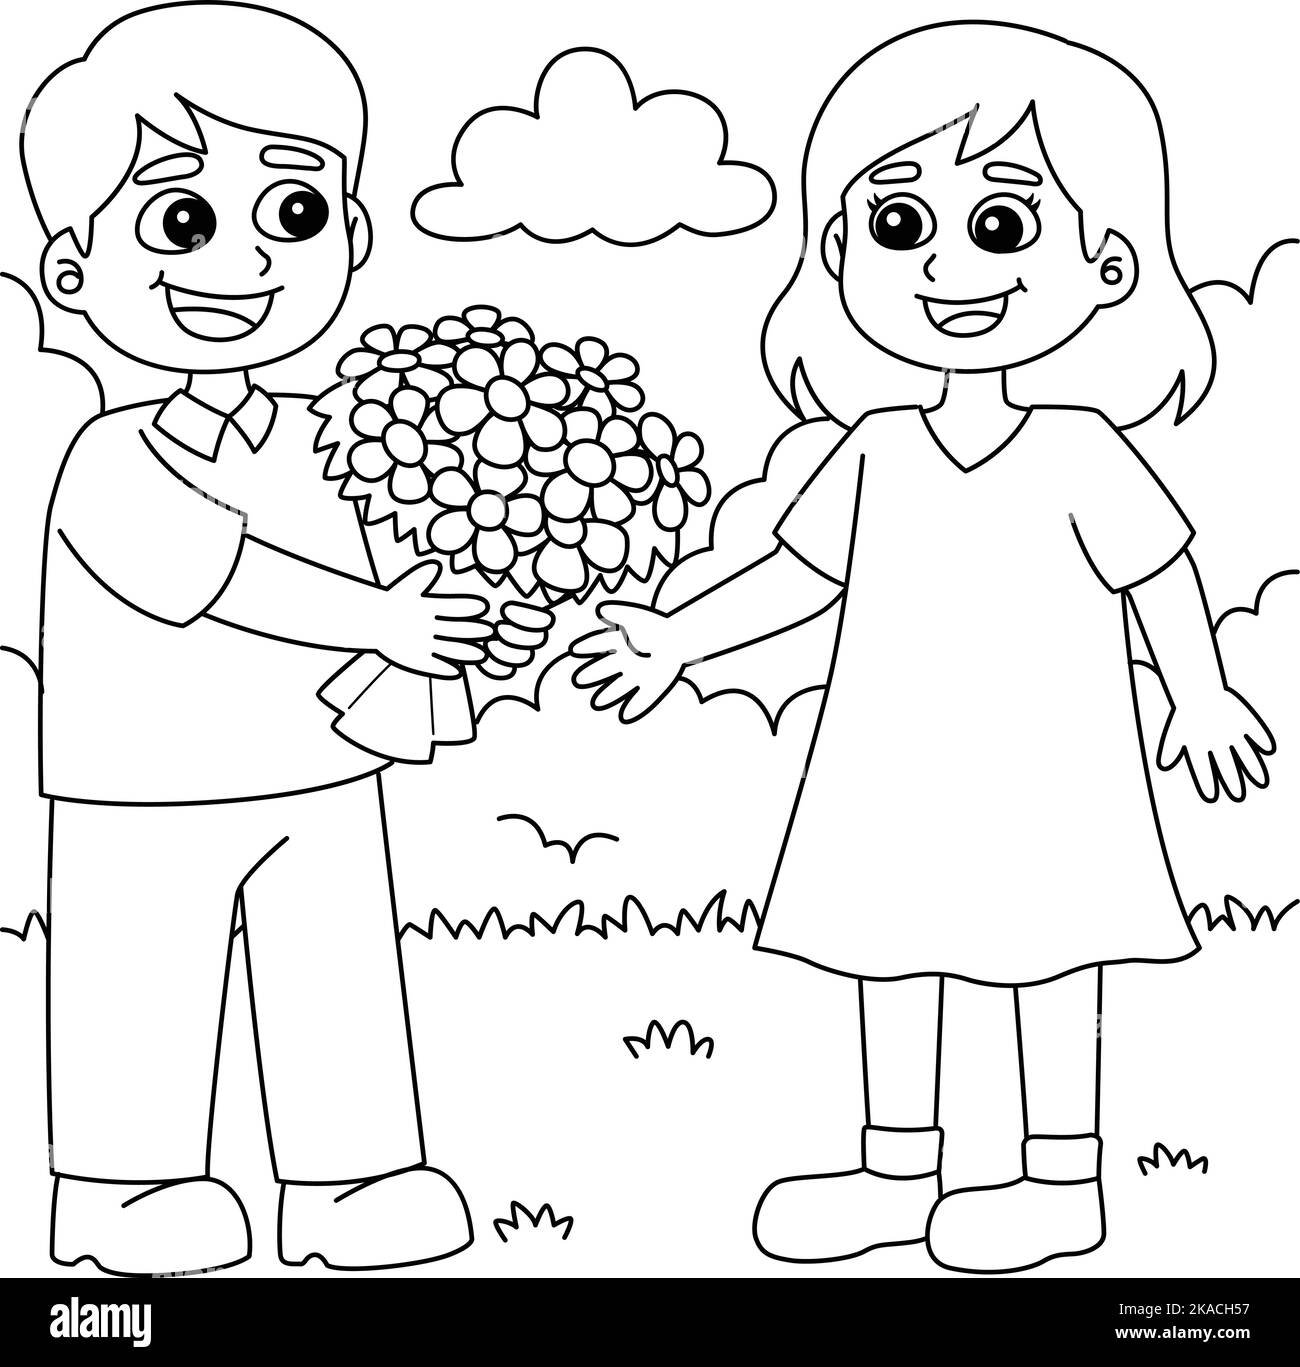 Valentines Day Loving Couple Coloring Page  Stock Vector